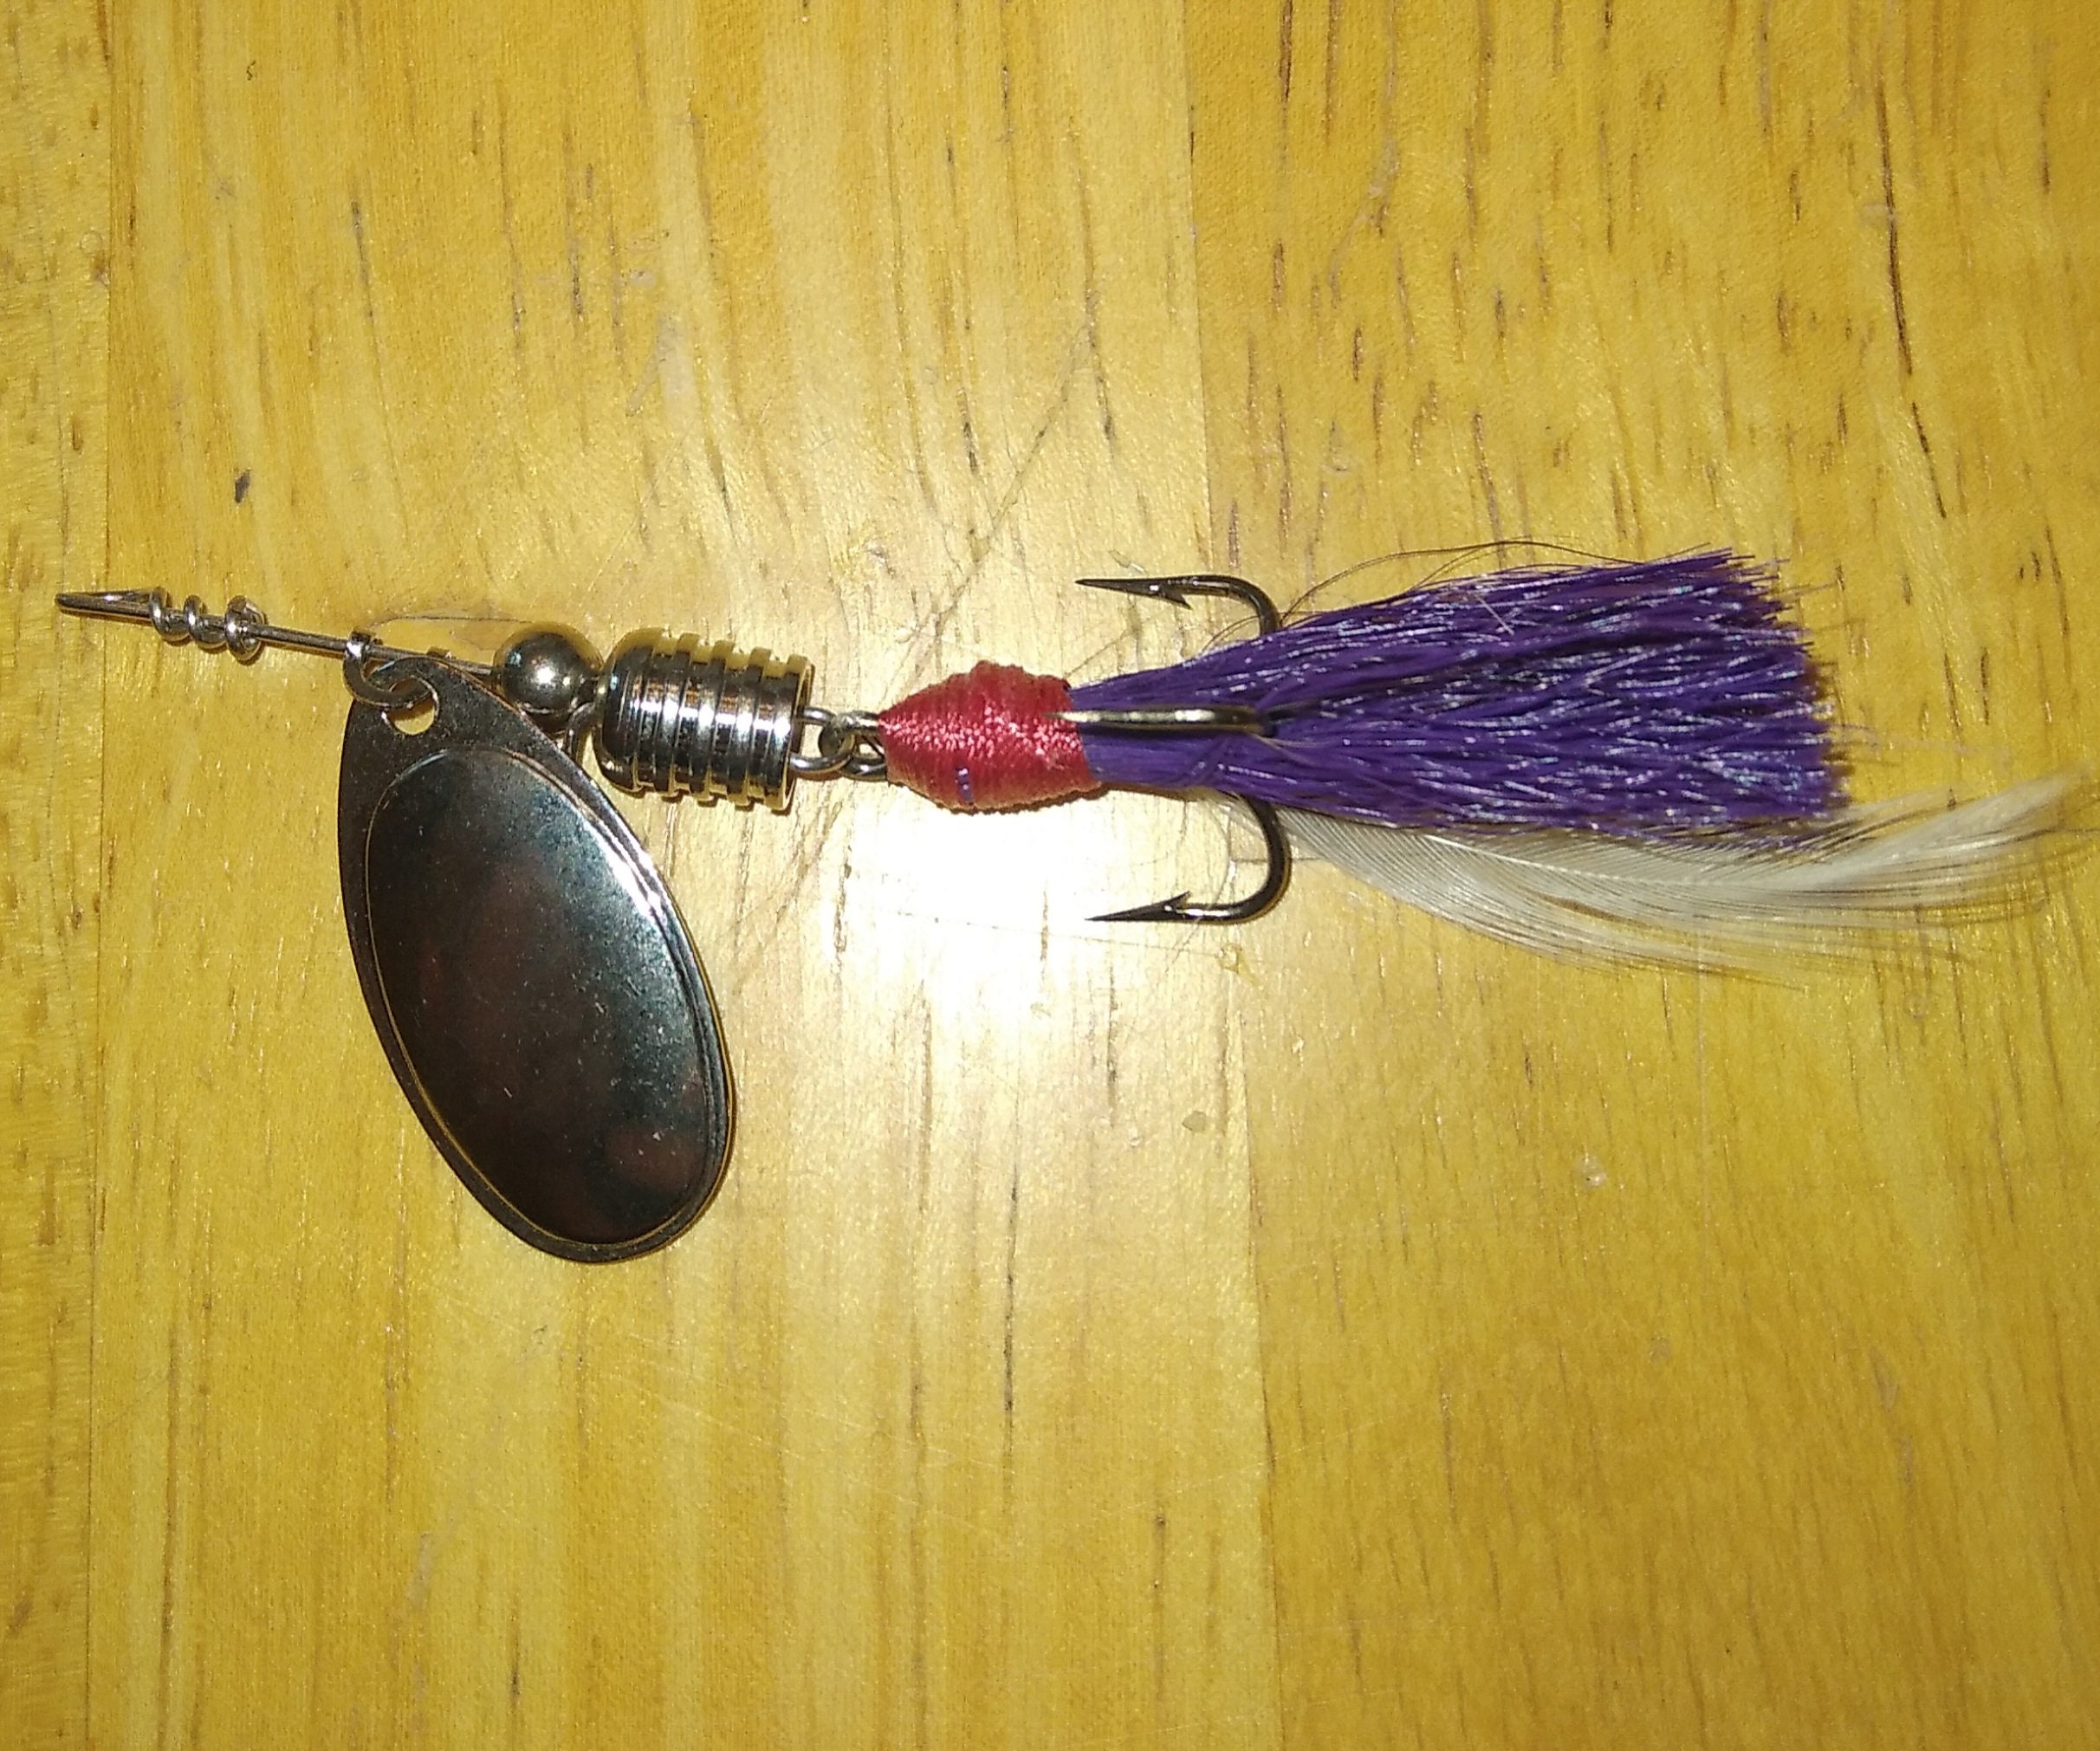 Handmade Fishing Lure Size 2 Nickel French Spinner Tied With